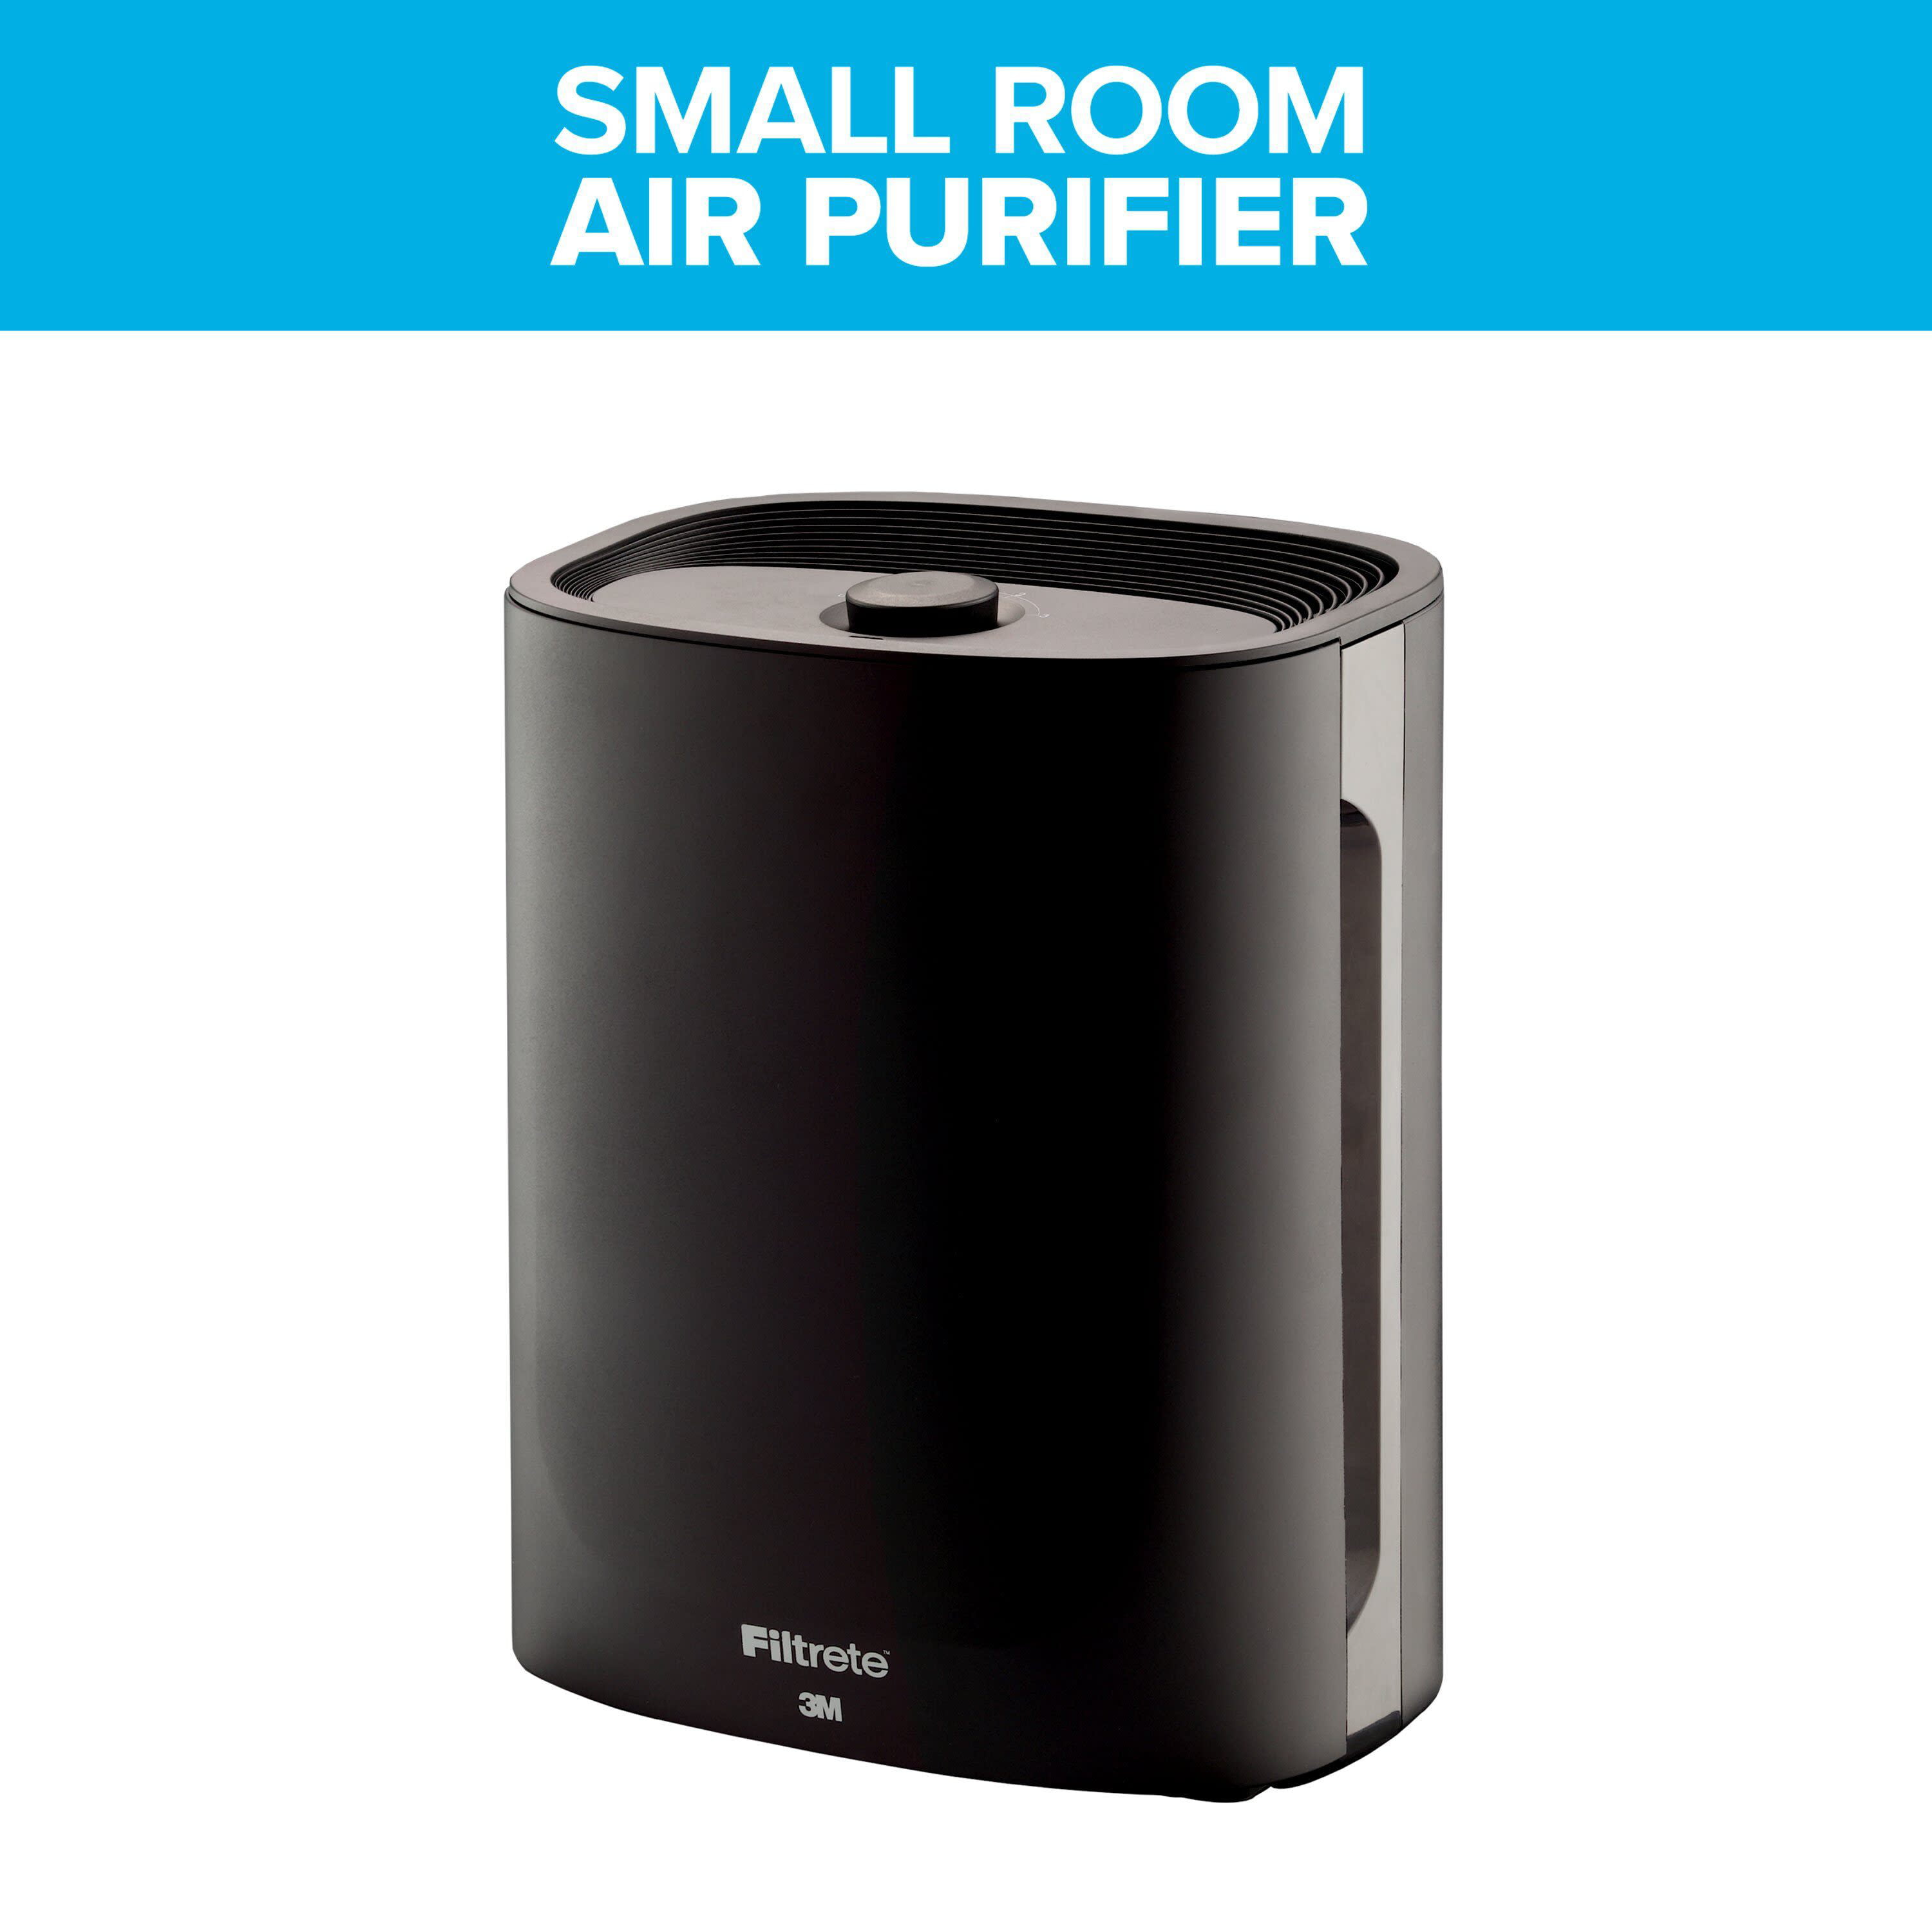 Filtrete by 3M Room Air Purifier, Console, 110 SQ Ft coverage, Black